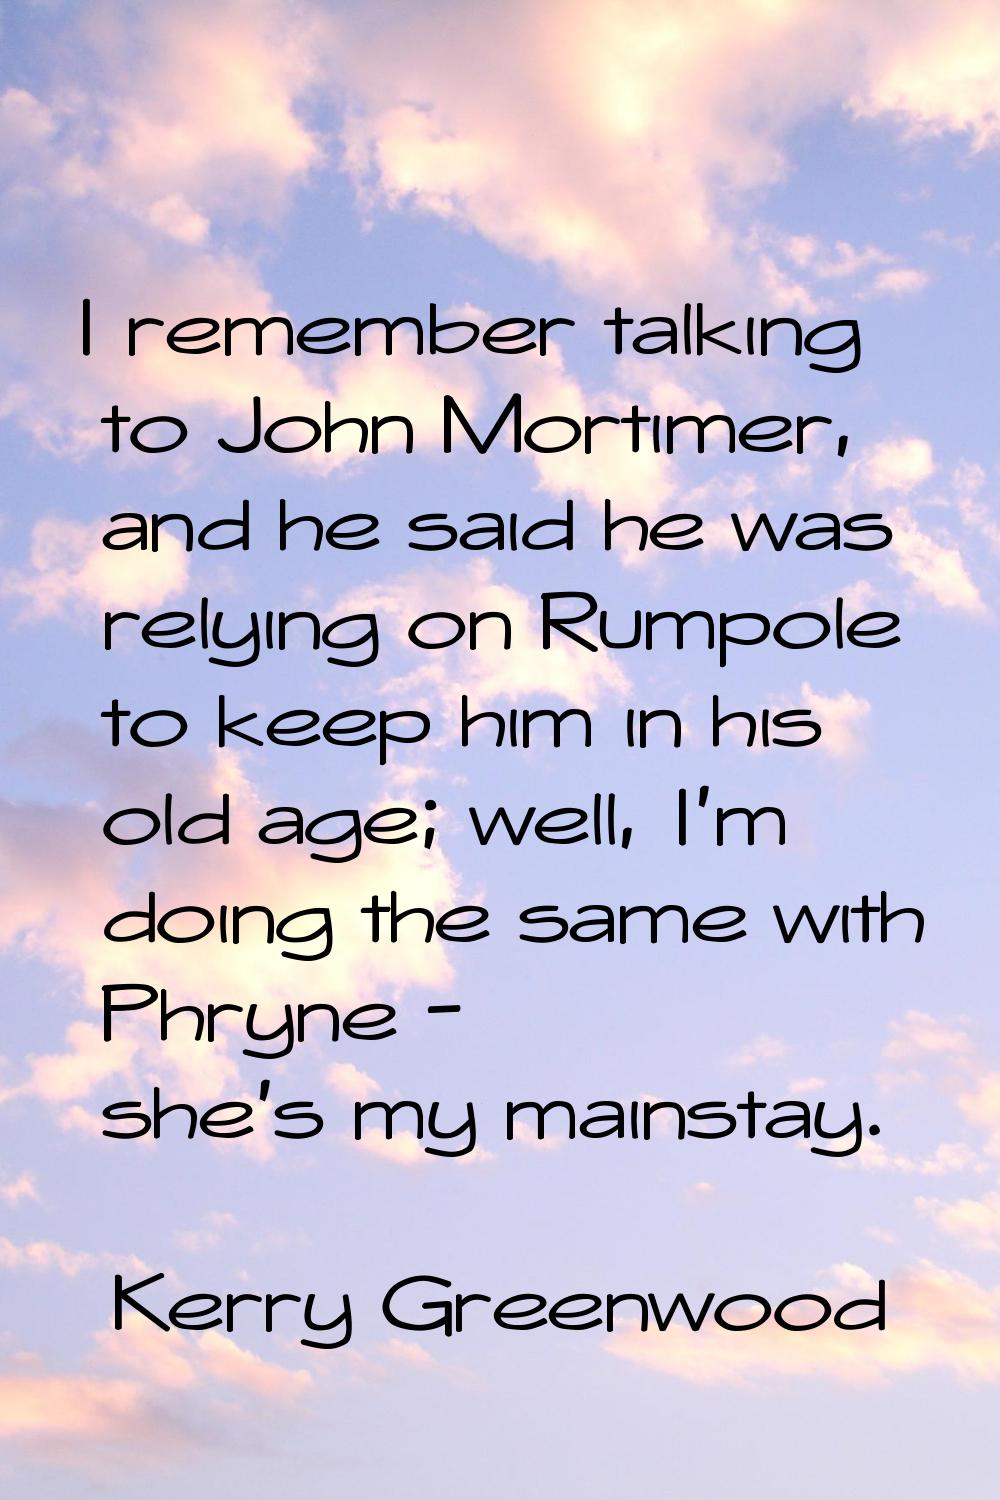 I remember talking to John Mortimer, and he said he was relying on Rumpole to keep him in his old a